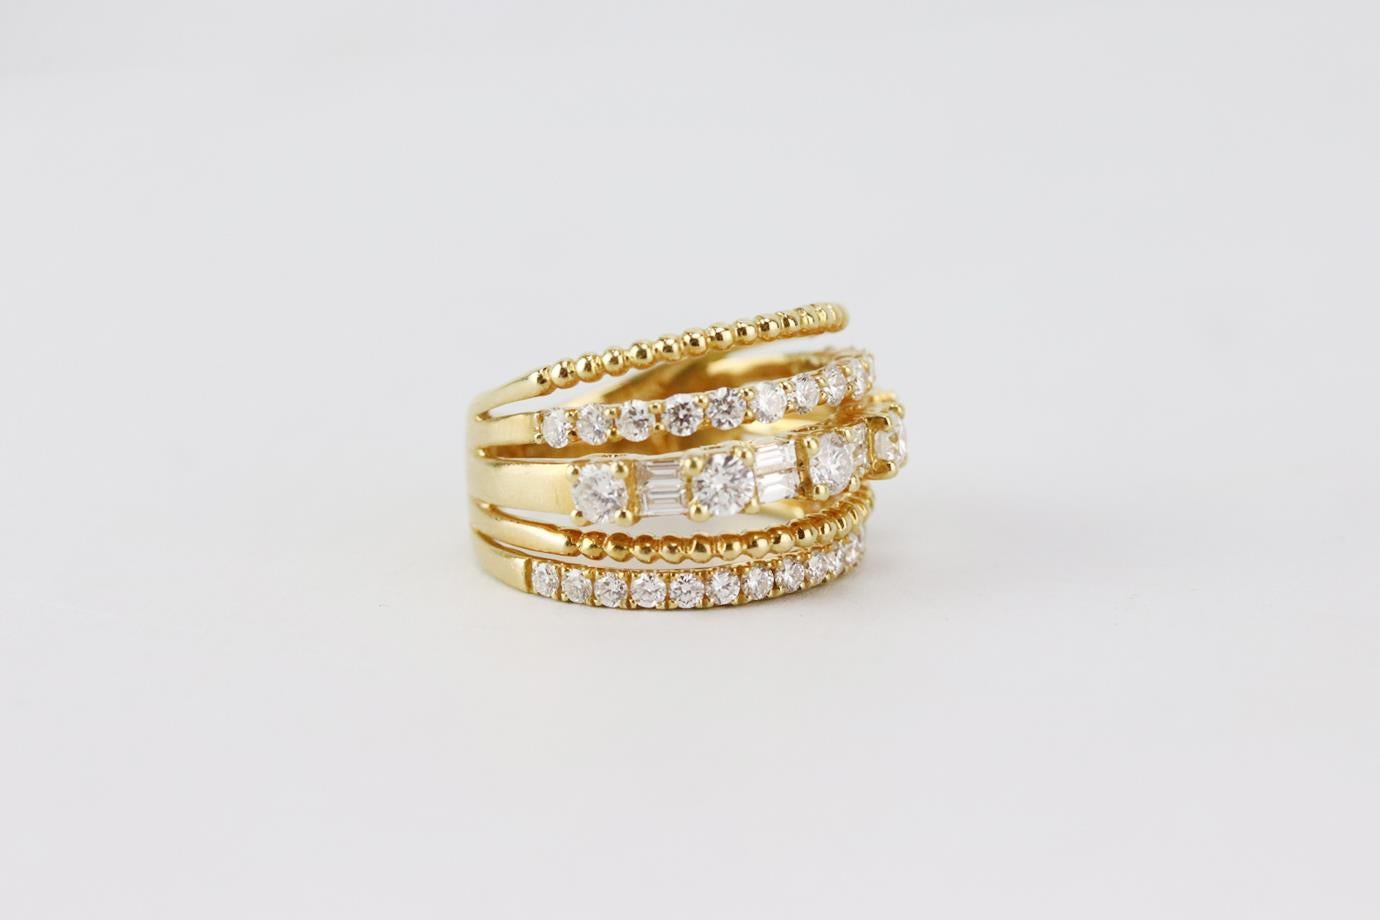 SHAY 18k yellow gold and mixed diamond ring. Made from 18k yellow-gold with 28 pave diamonds and 8 baguette diamonds and 5 additional diamonds weighing 1.65 cts. Yellow-gold. Does not come with box or dustbag. Ring Size: 16 mm. Length: 1 in
